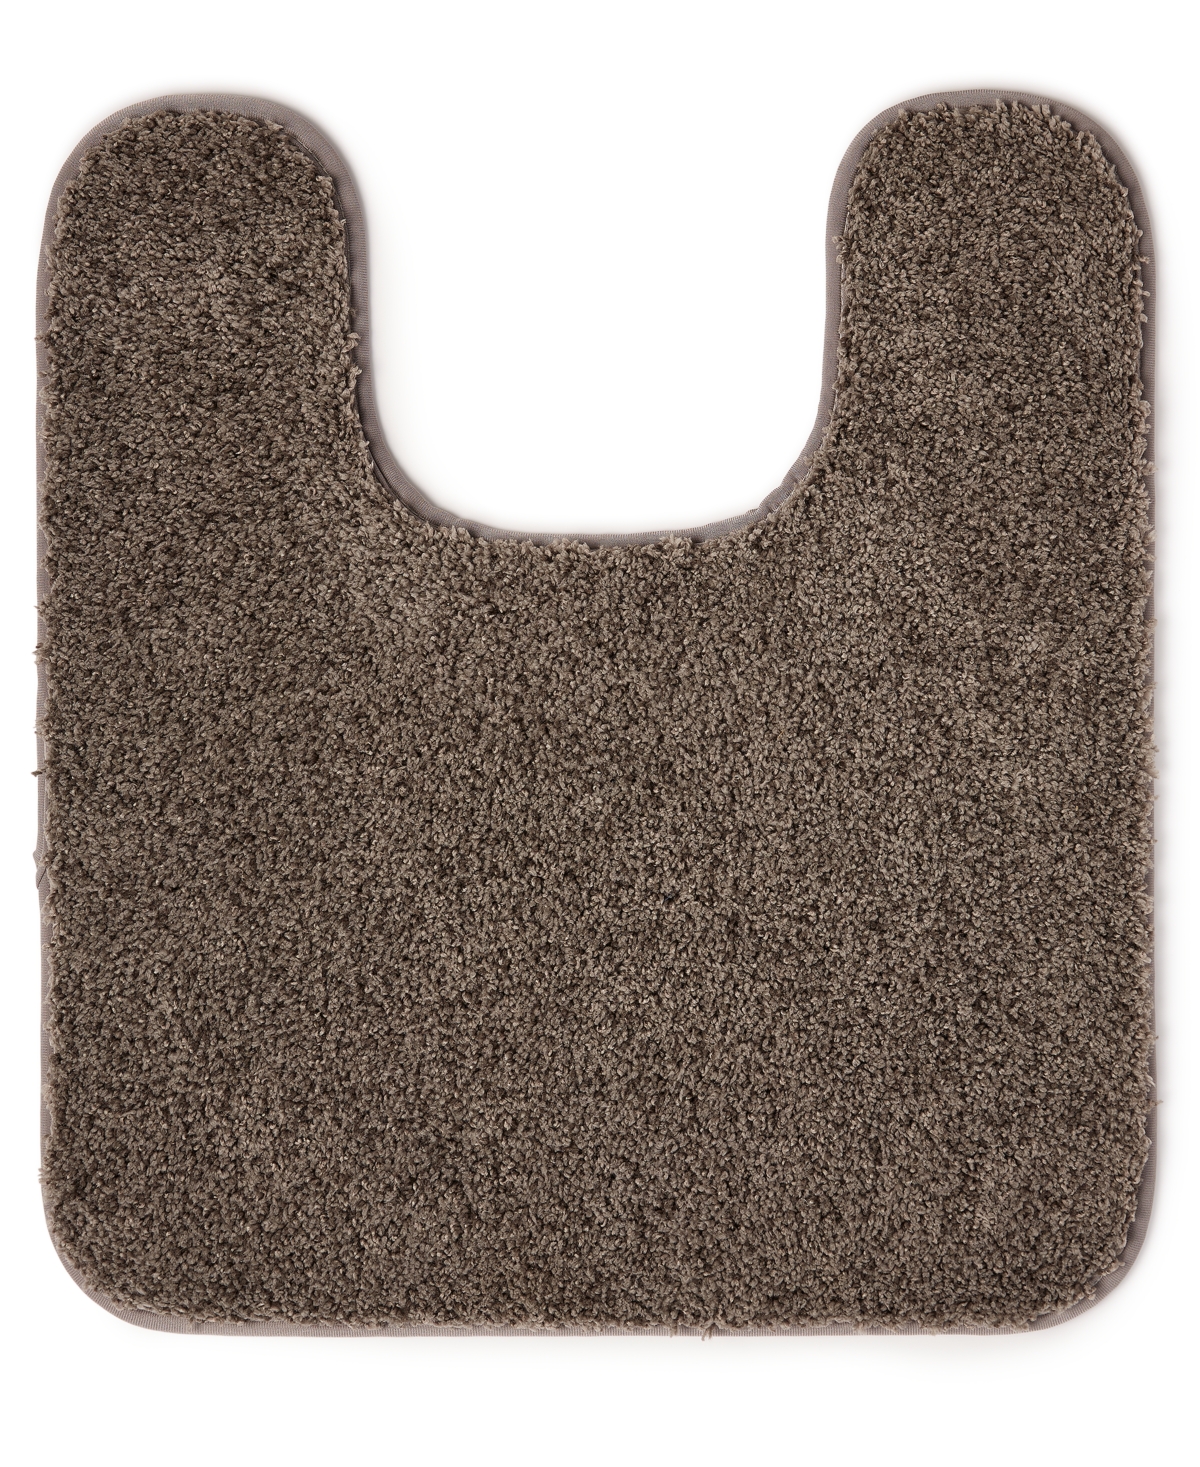 Charter Club Elite Contour Bath Rug, Created For Macy's In Smoked Grey